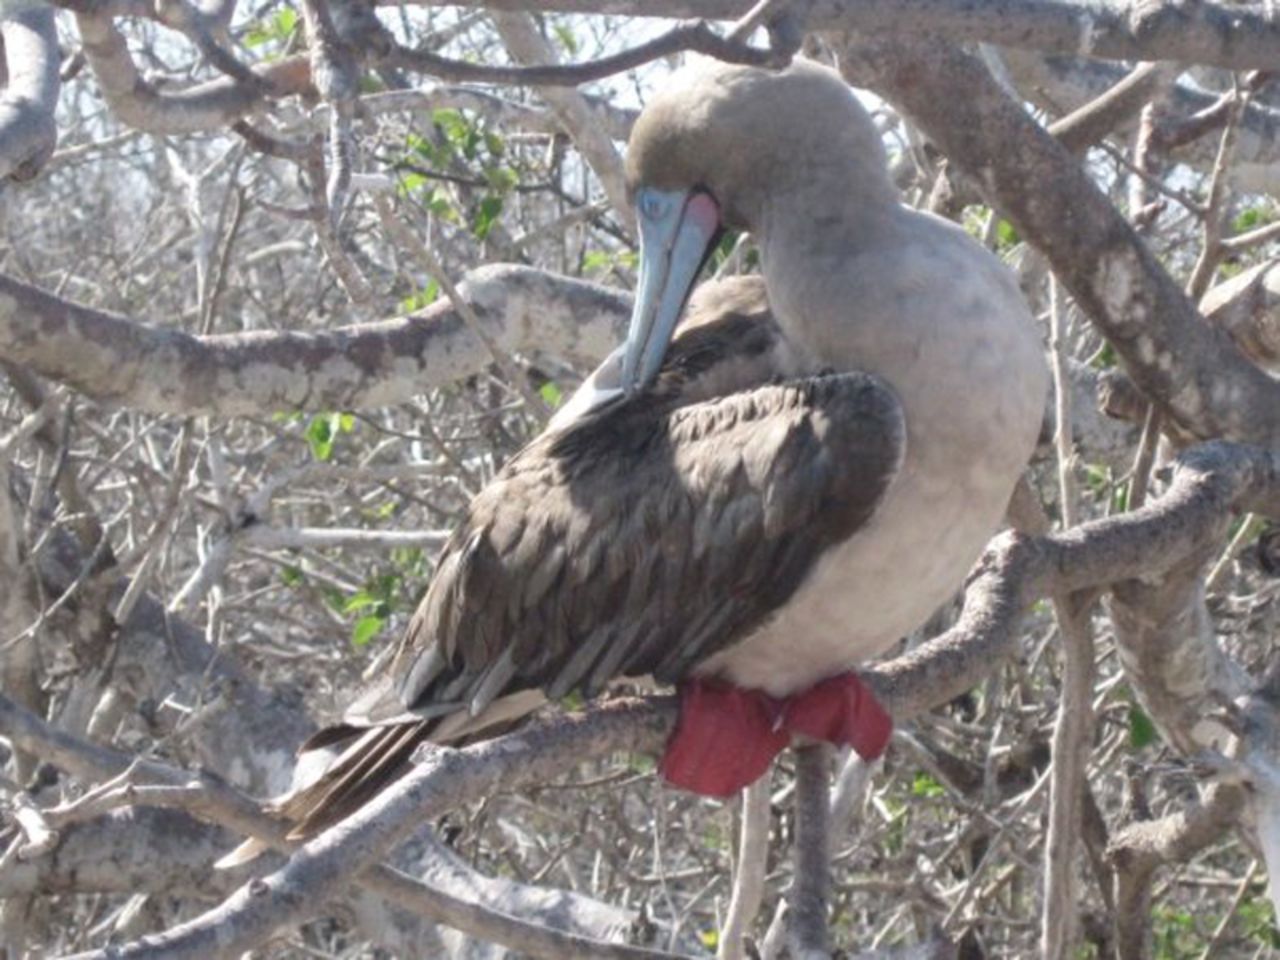 Krupali Tejura of Los Angeles sent this picture of a red-footed booby from a visit in 2007. She's a radiation oncologist and was always fascinated with the islands and Charles Darwin, so she saved up for her first trip in 2002. "I was hooked.  I travel the world, but this place holds a special magical place in my heart. Love it. Absolutely adore it." She did her more recent trip on a yacht tour group, and she's planning to take another trip in a few months.